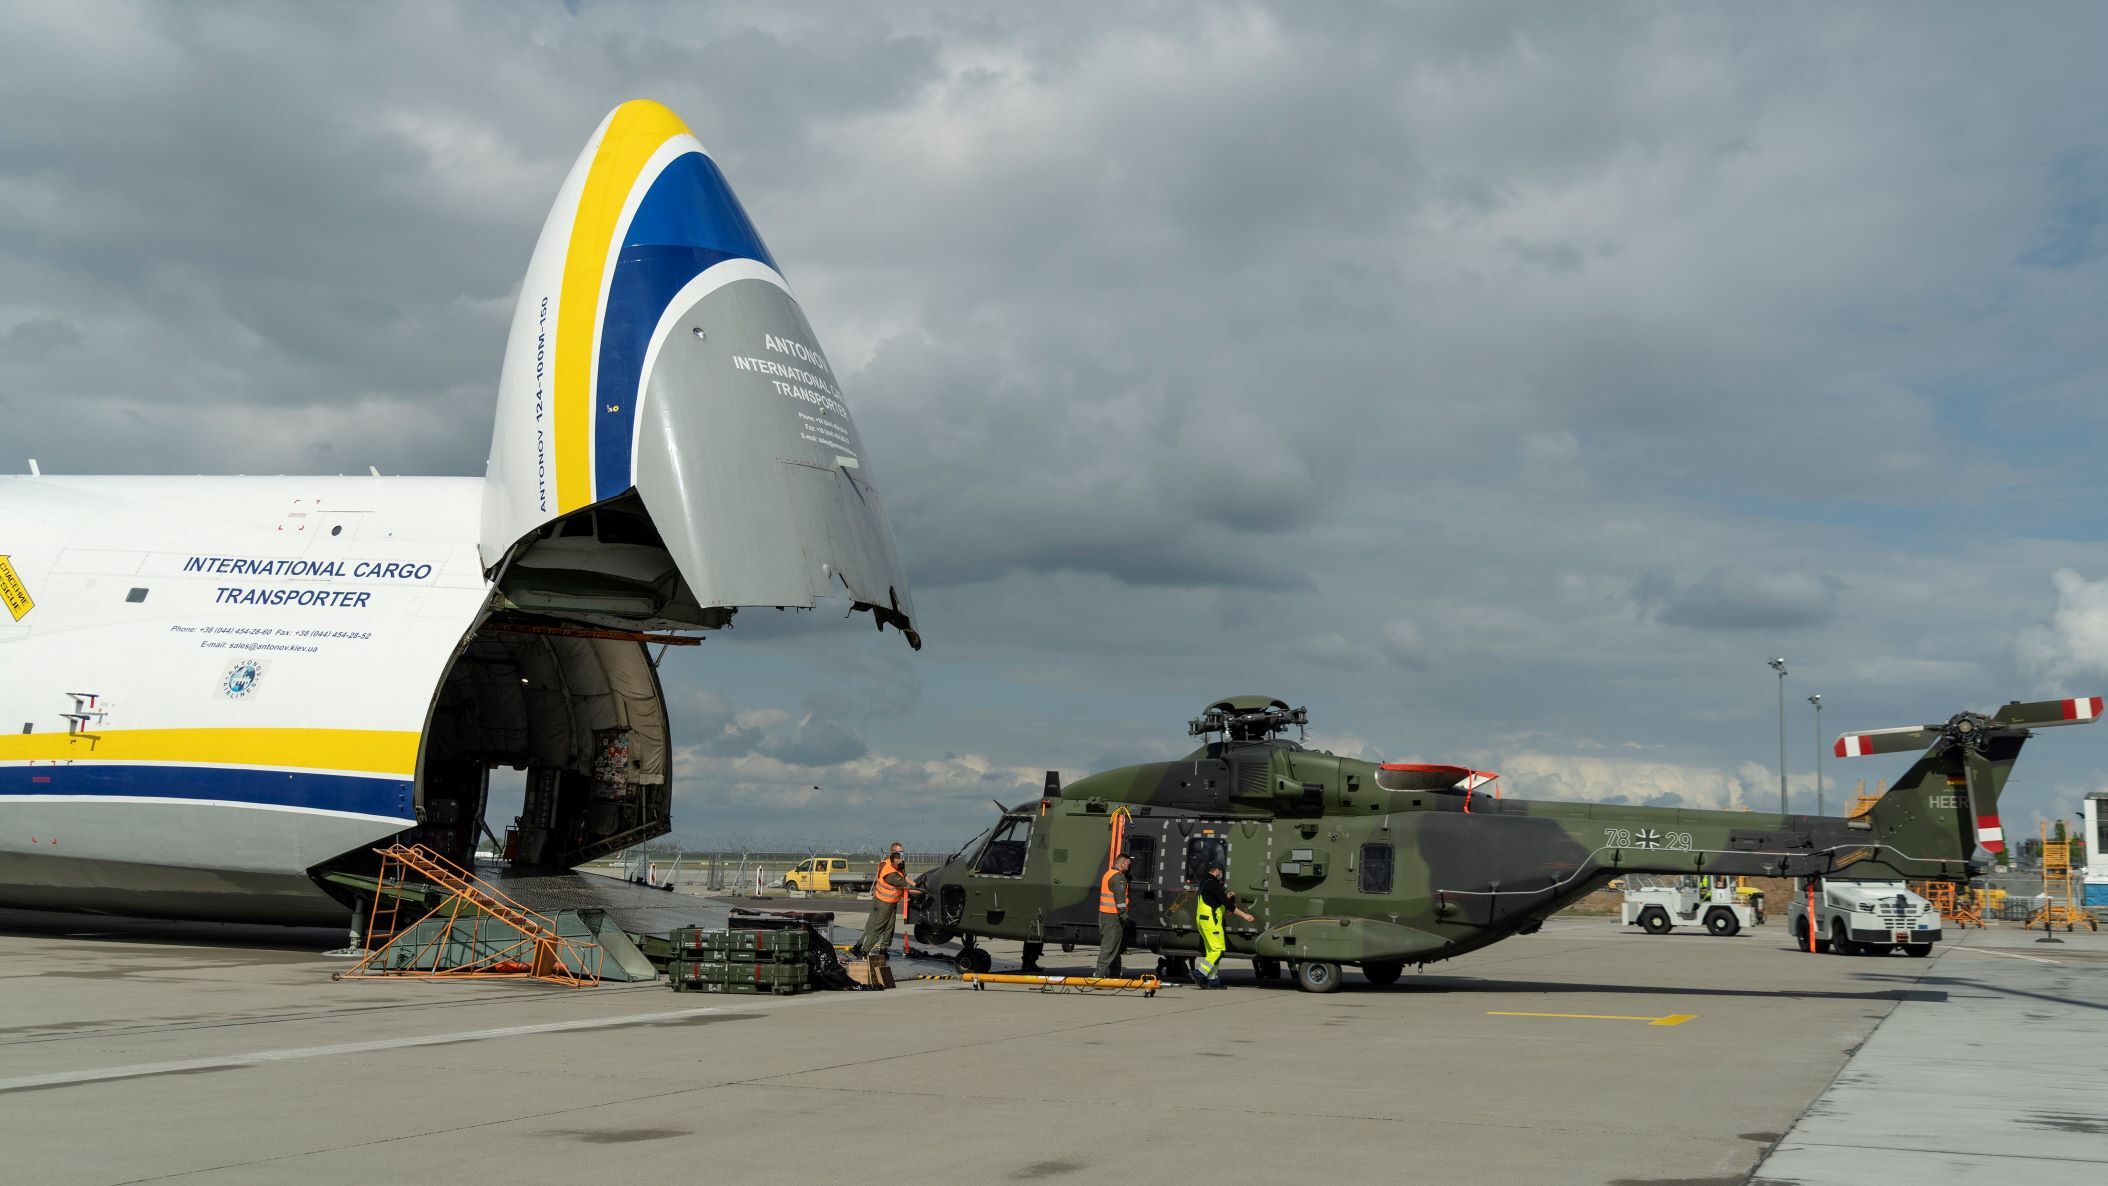 A giant nose-loading plane and a helicopter in front after being removed from the plane.